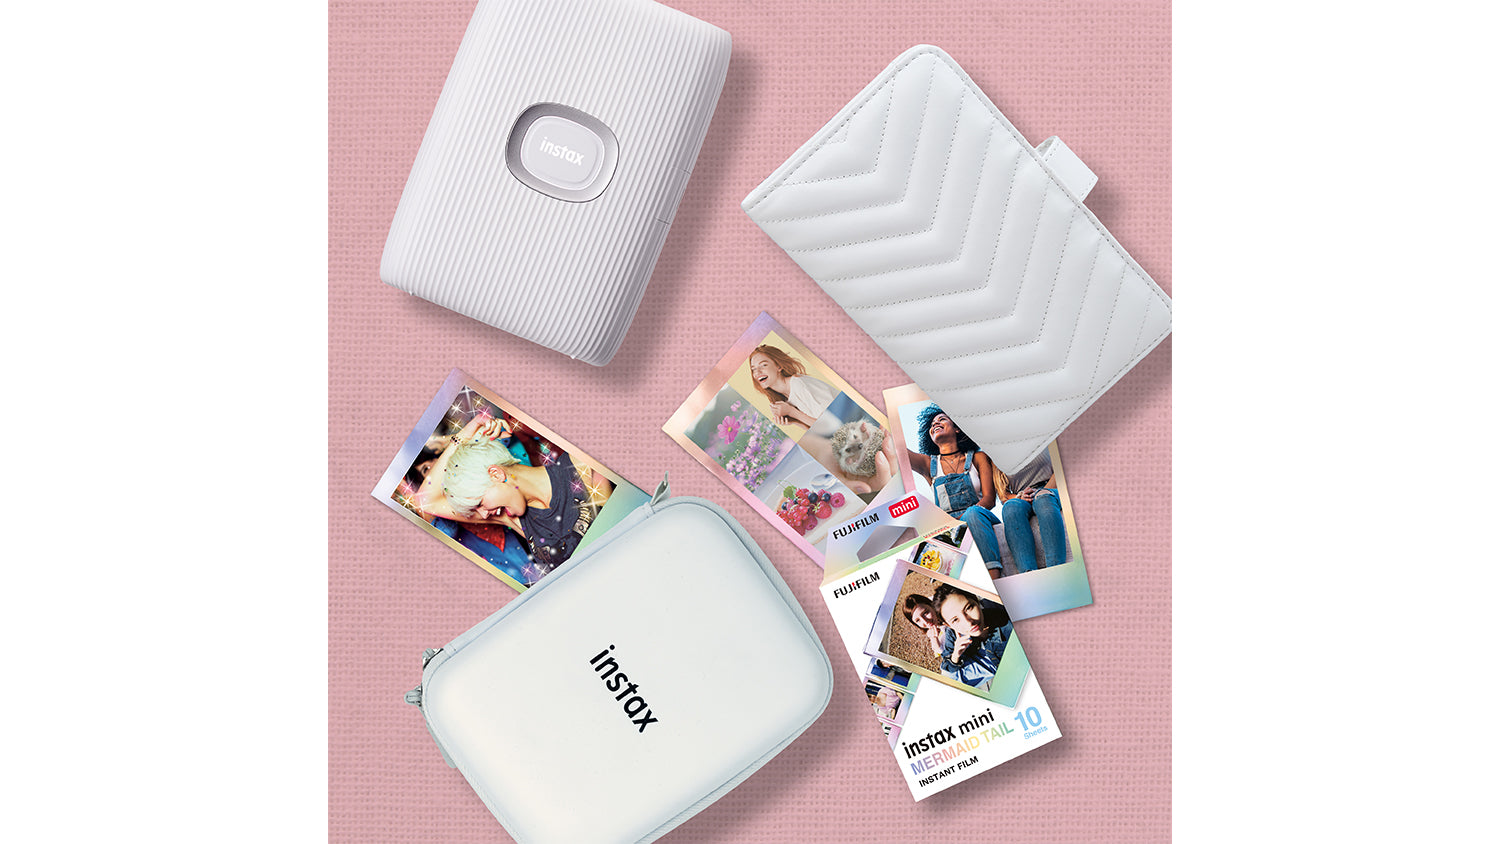 Instax mini Link 2 White Limited Edition Gift Pack